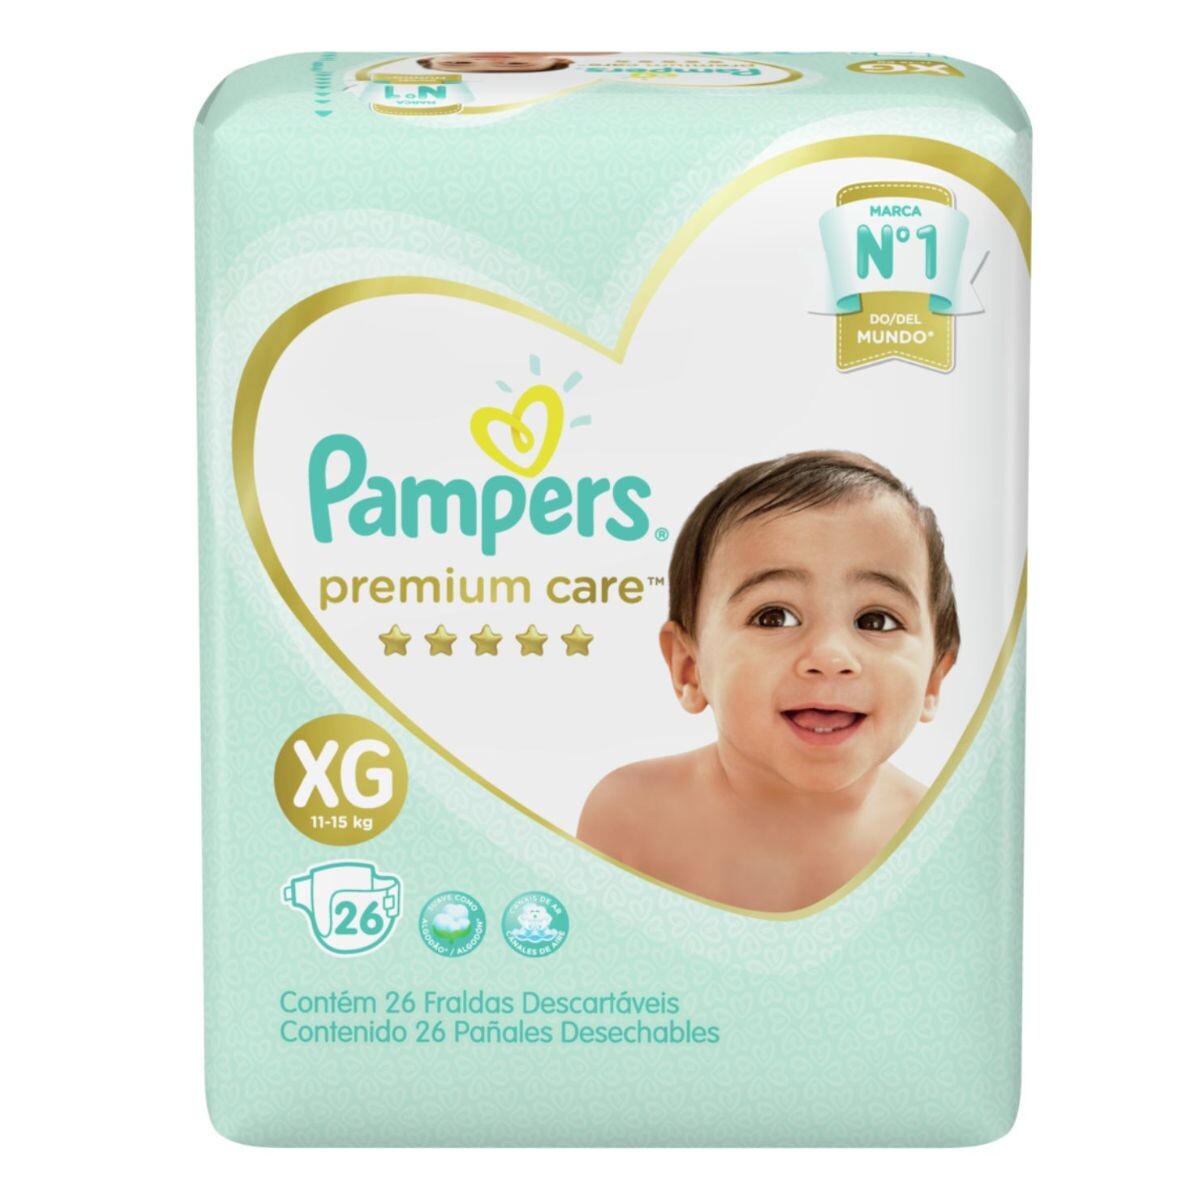 Pañales Pampers Premium Care XG X26 